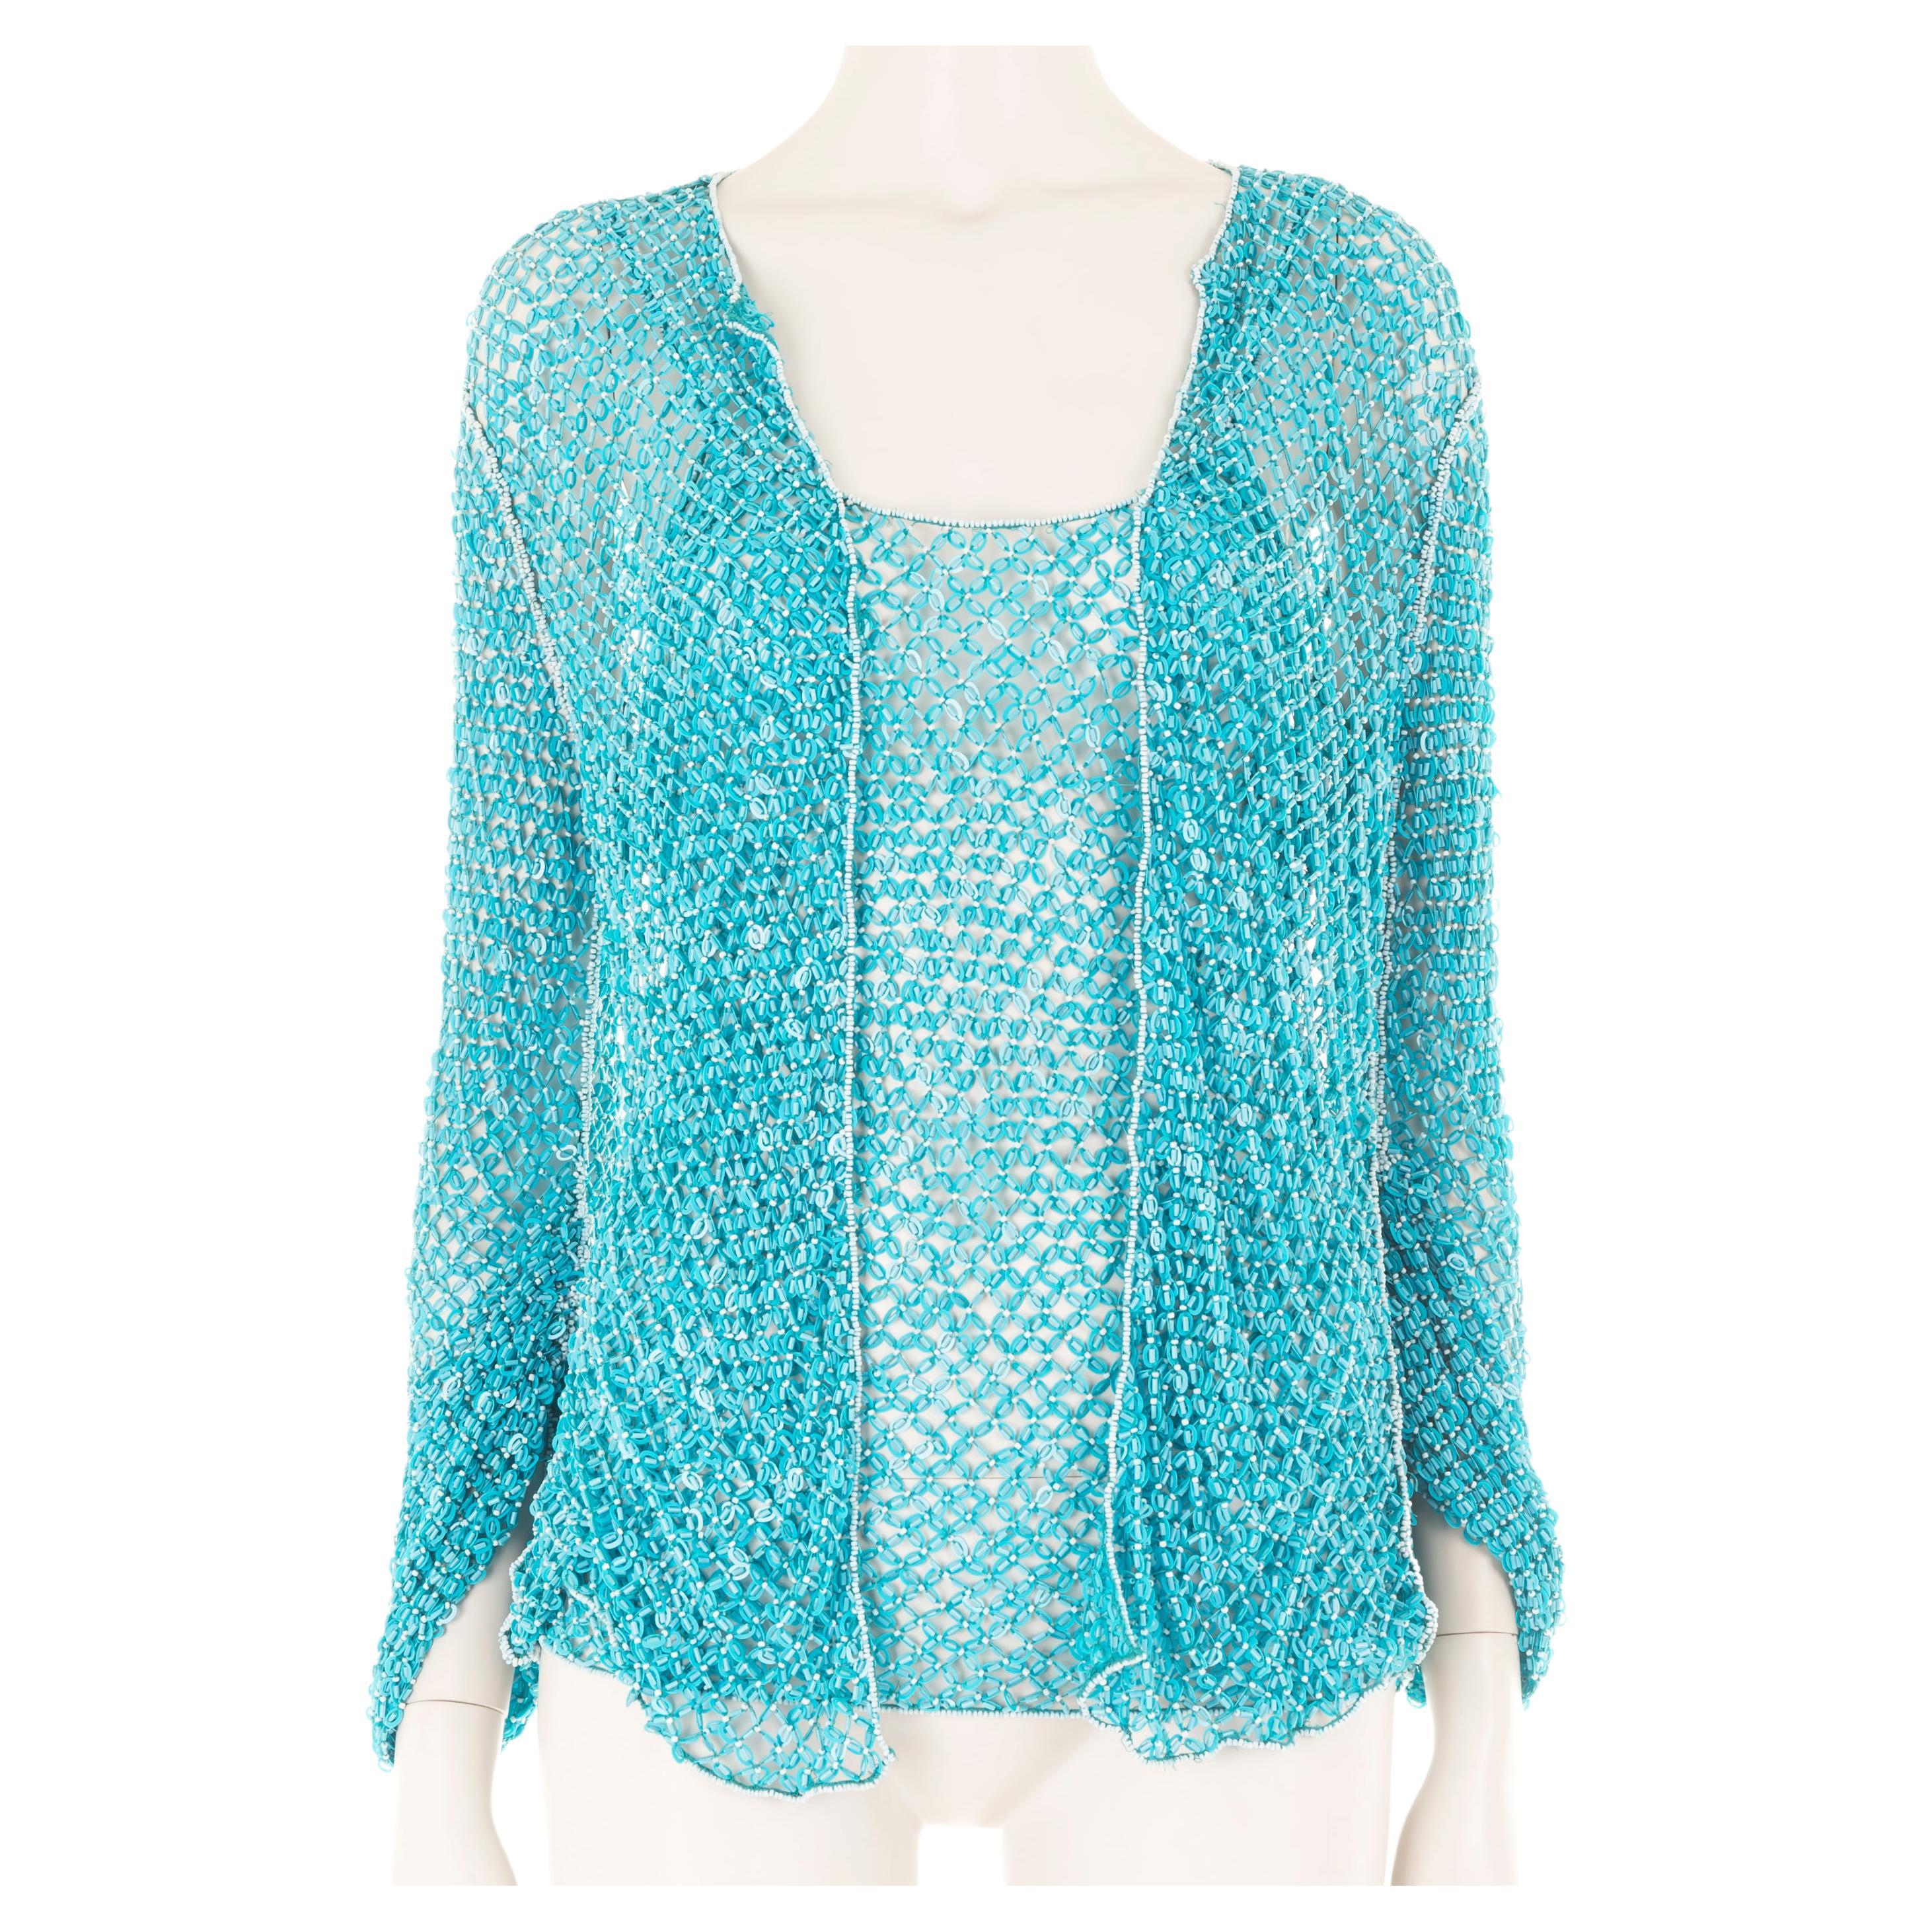 Laura Biagiotti S/S 2004 blue beaded fishnet cardigan and top set For Sale